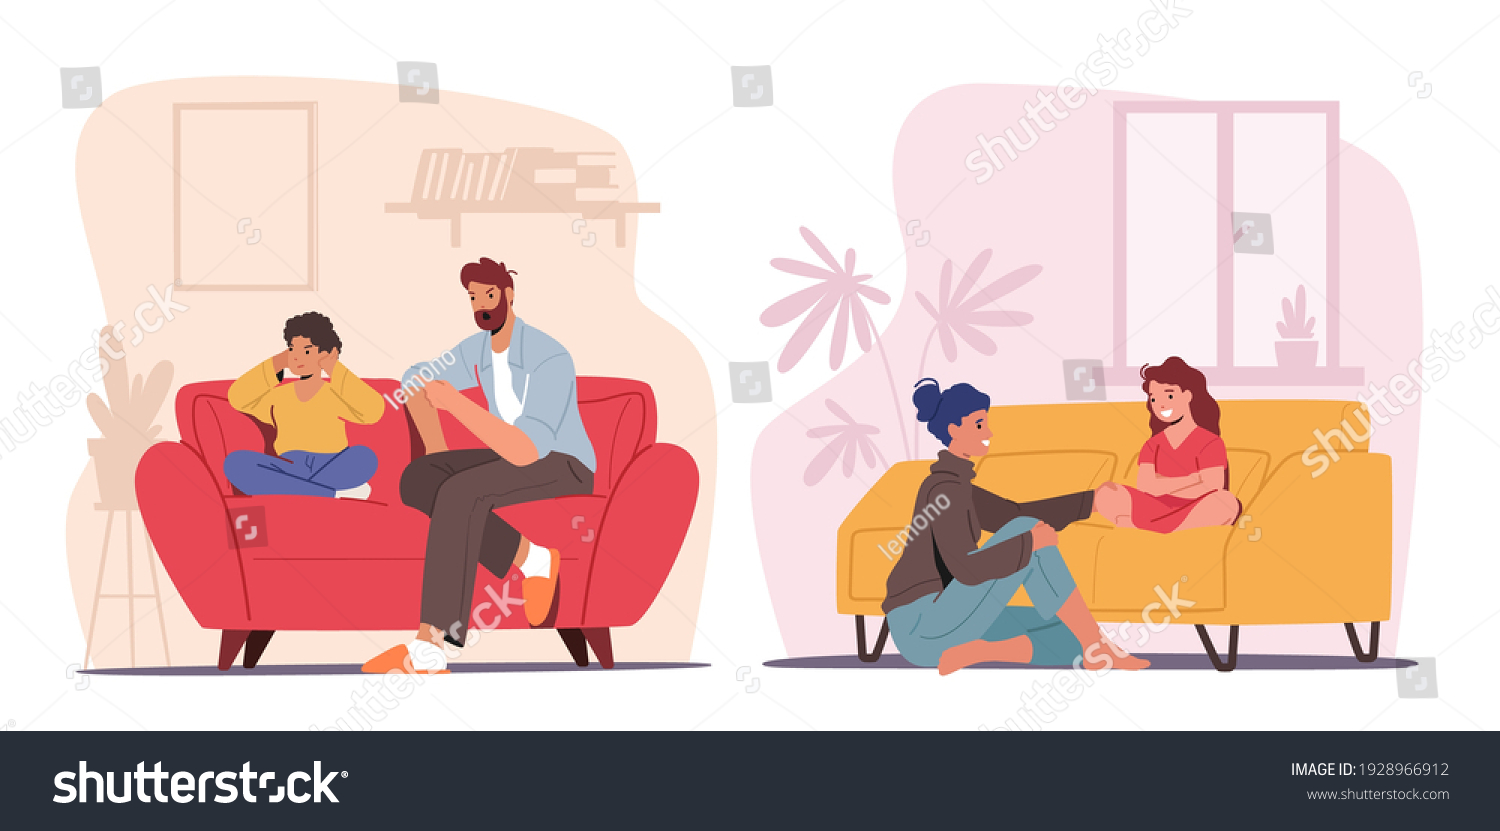 Children and Parents Talking Concept. Father and Mother Characters Talk to Son or Daughter. Dad Scold Boy, Mom Share Secrets with Girl. Family Relations, Parenting. Cartoon People Vector Illustration #1928966912